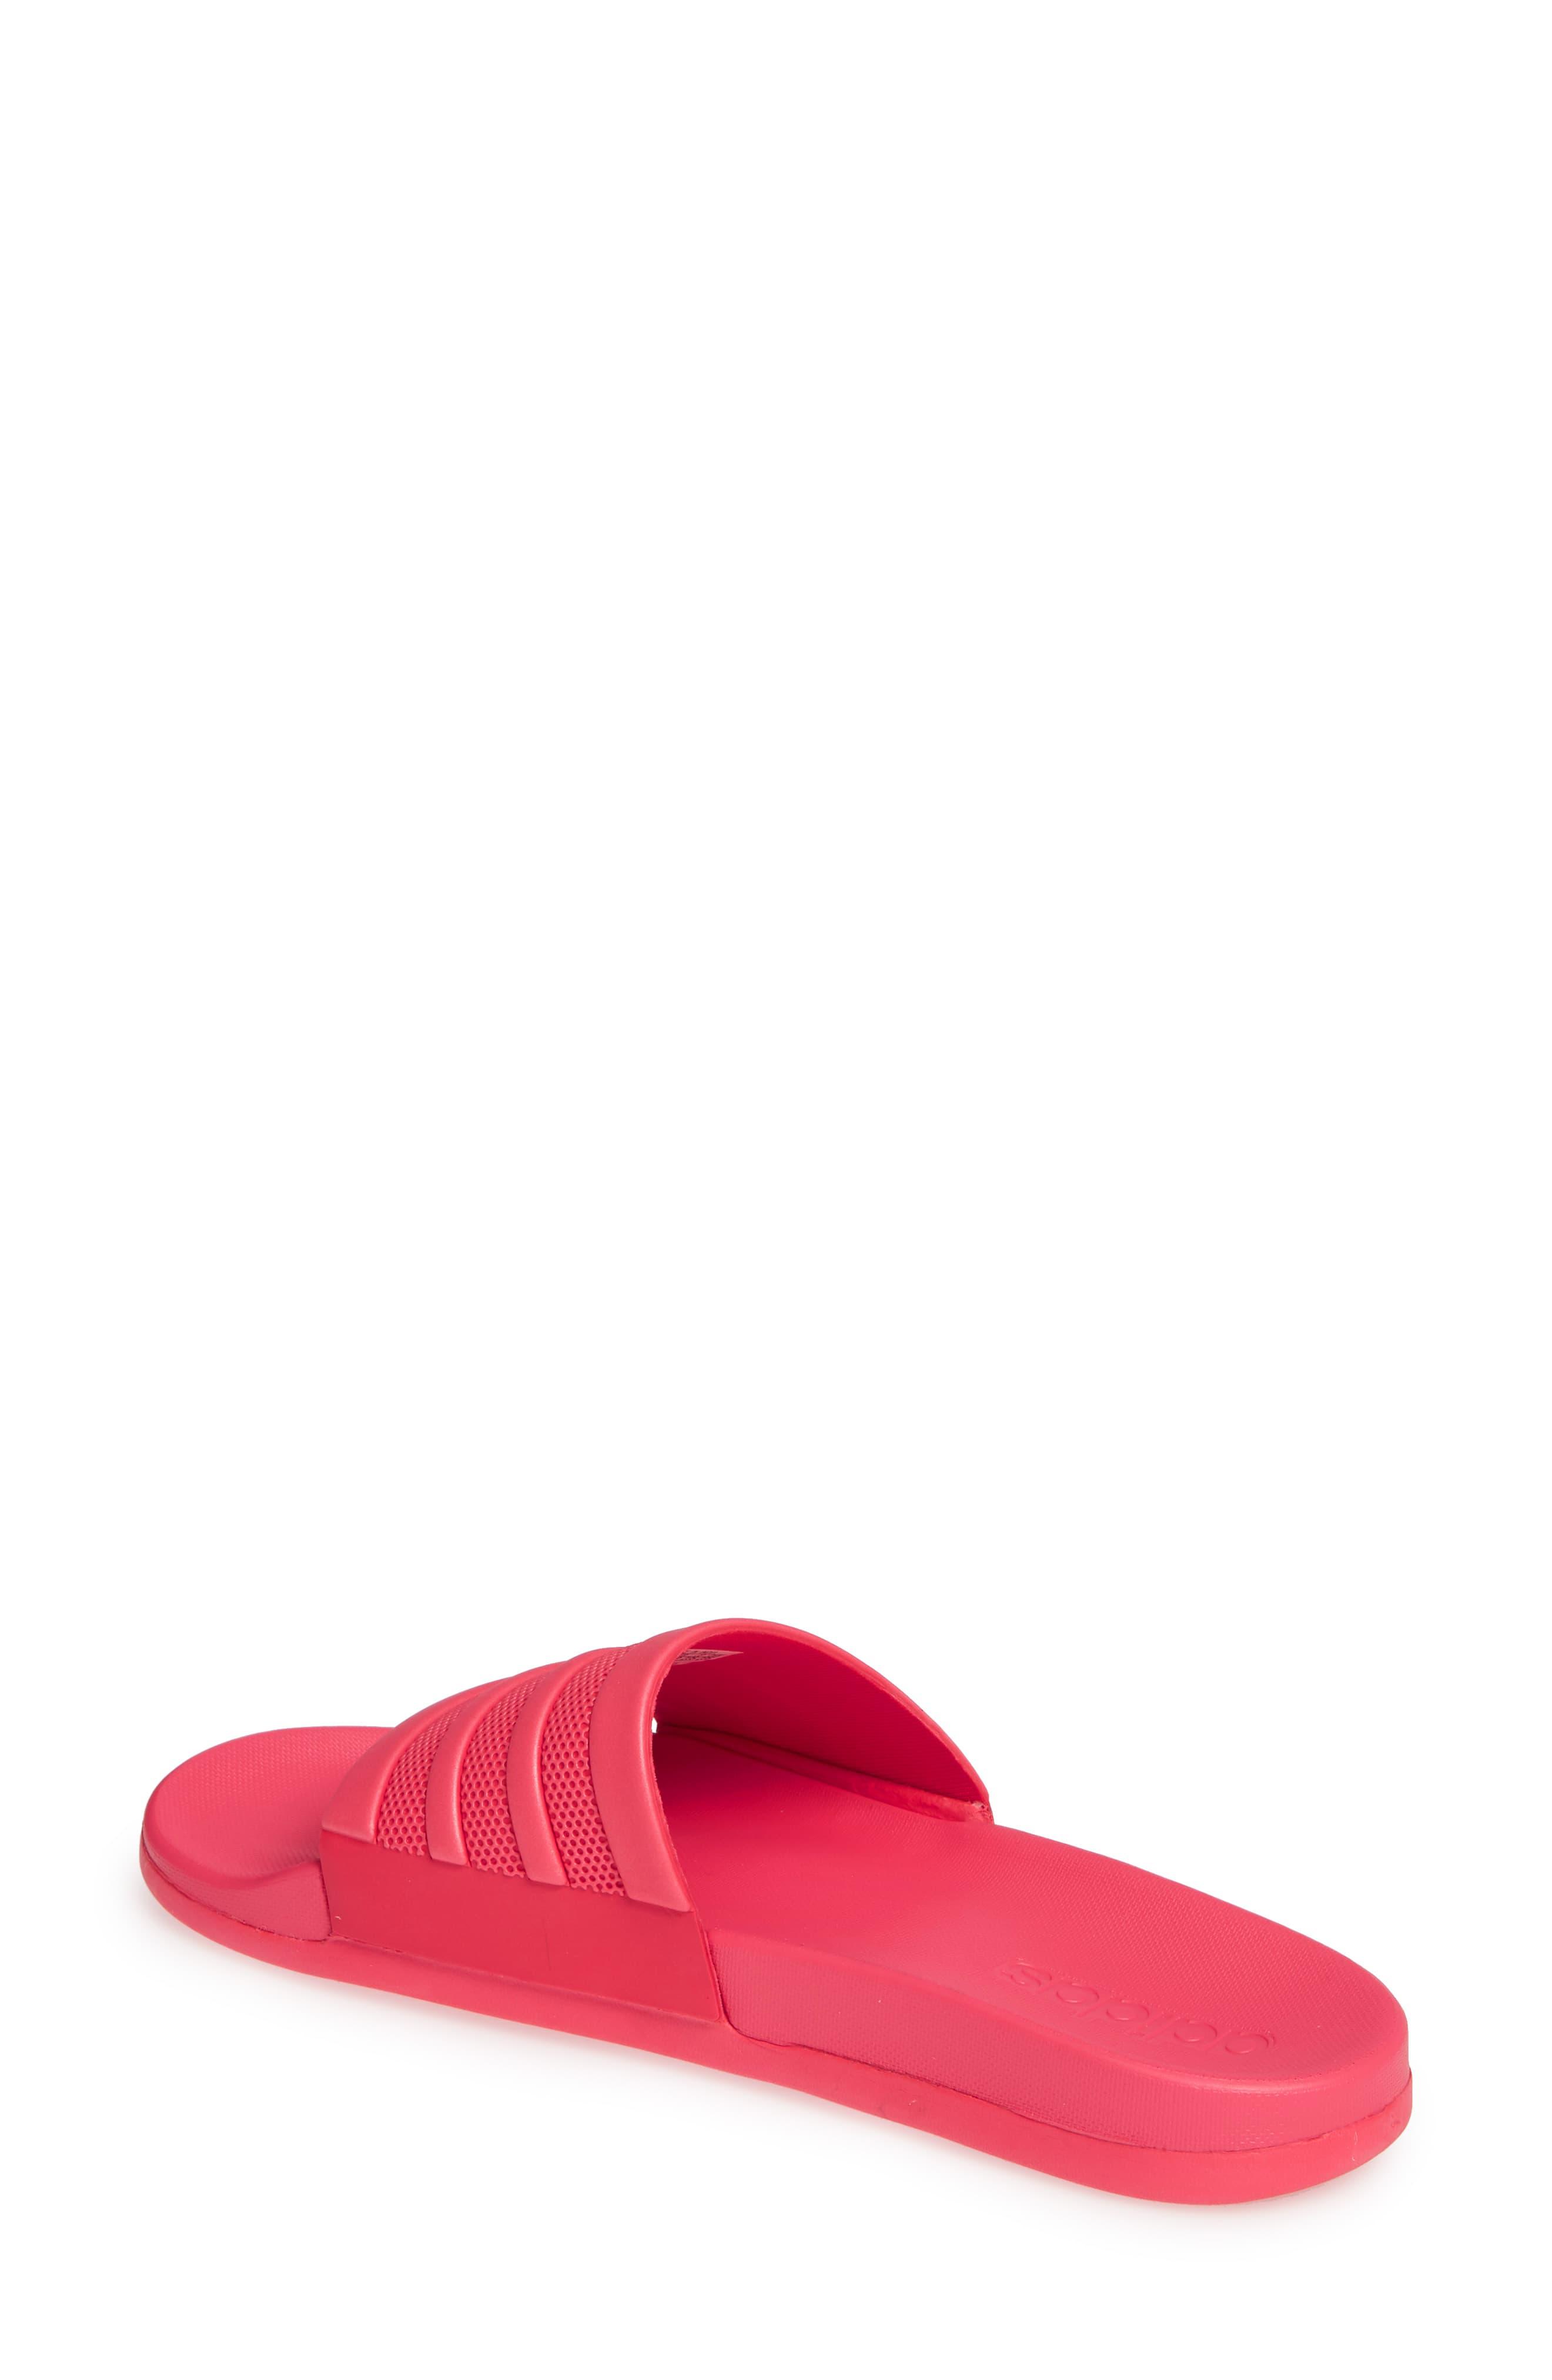 adidas Rubber Adilette Cf+ Mono in Bright Pink (Pink) - Lyst